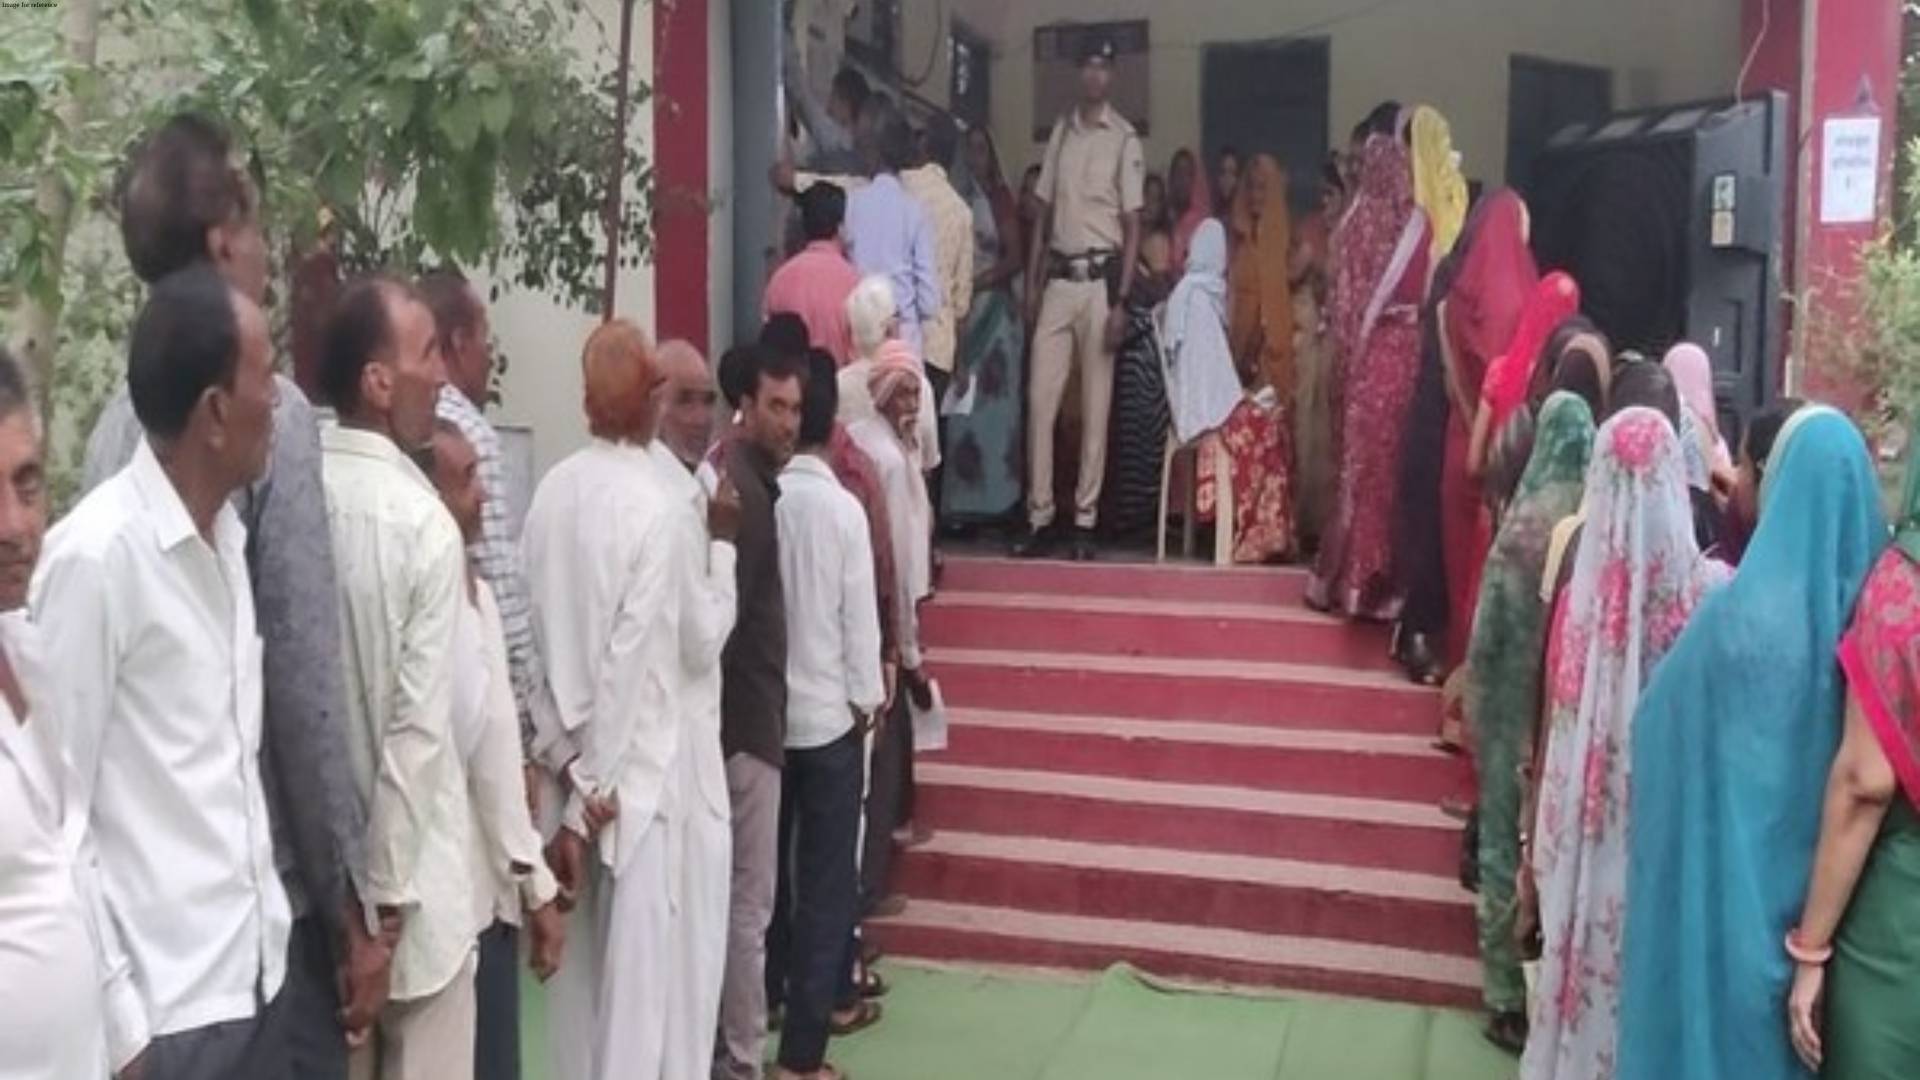 32.38 pc voter turnout recorded in Madhya Pradesh in 4th phase of LS poll till 11 am